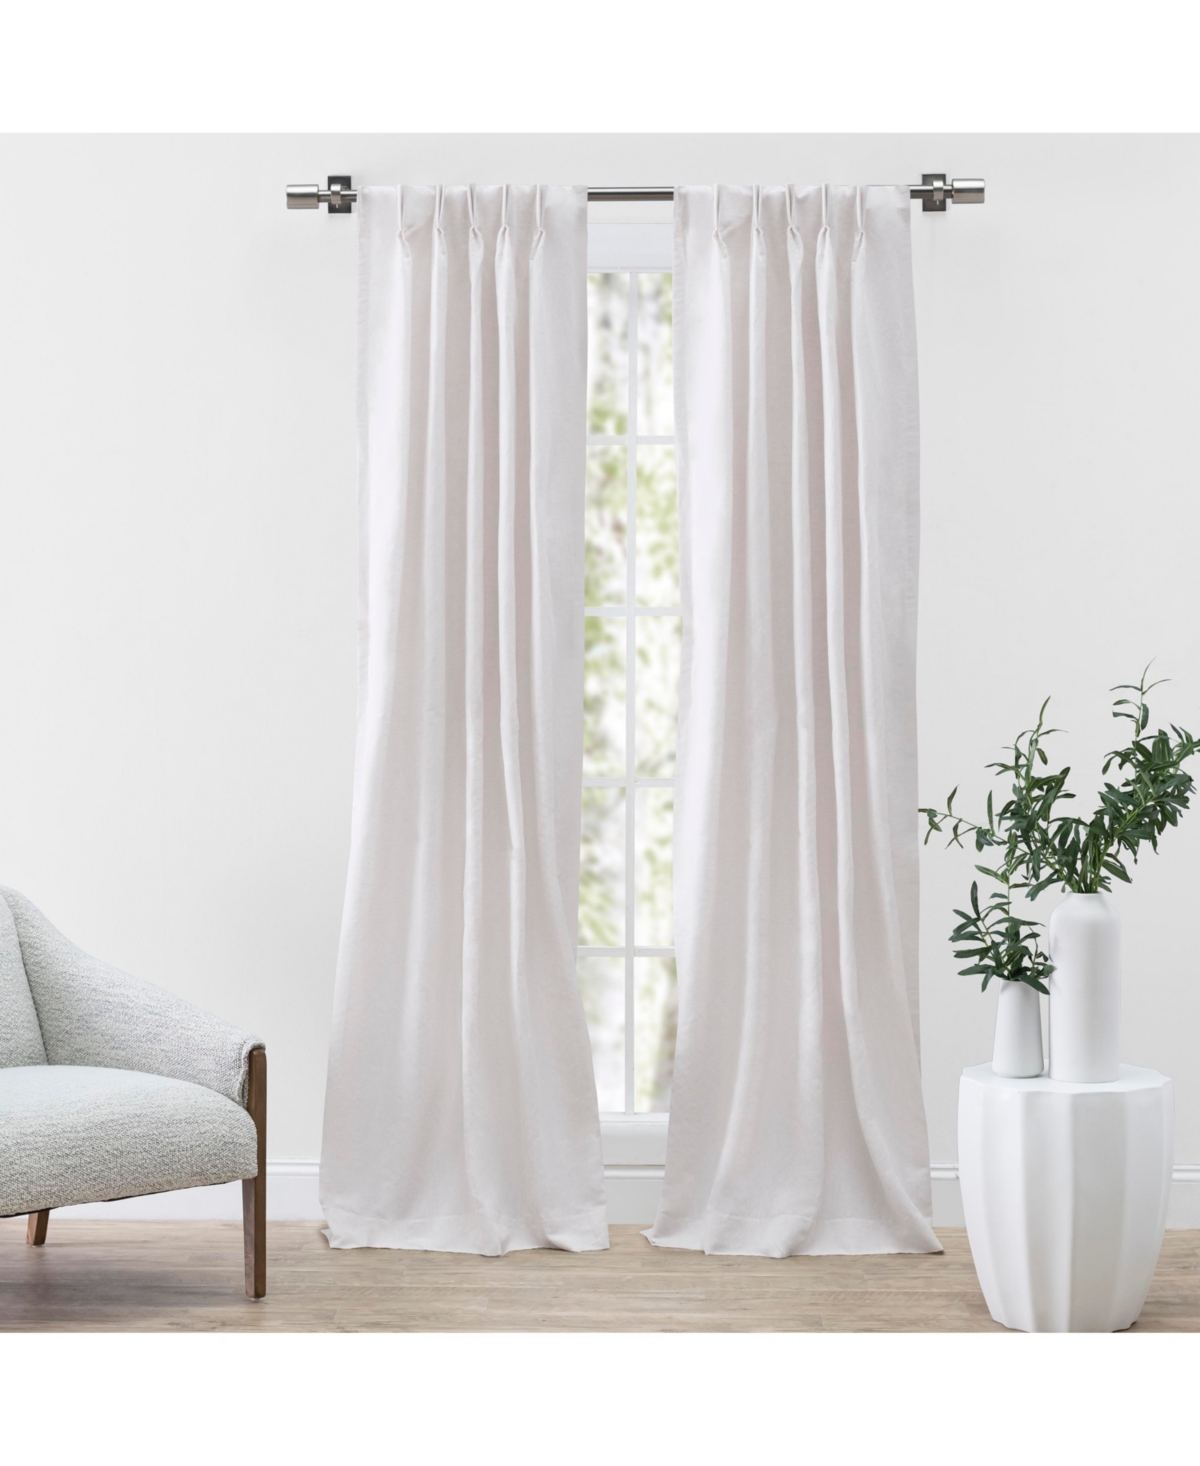 Serene Pinch Pleat Curtain Pair with Back Tabs 56"W x 108"L - Oatmeal